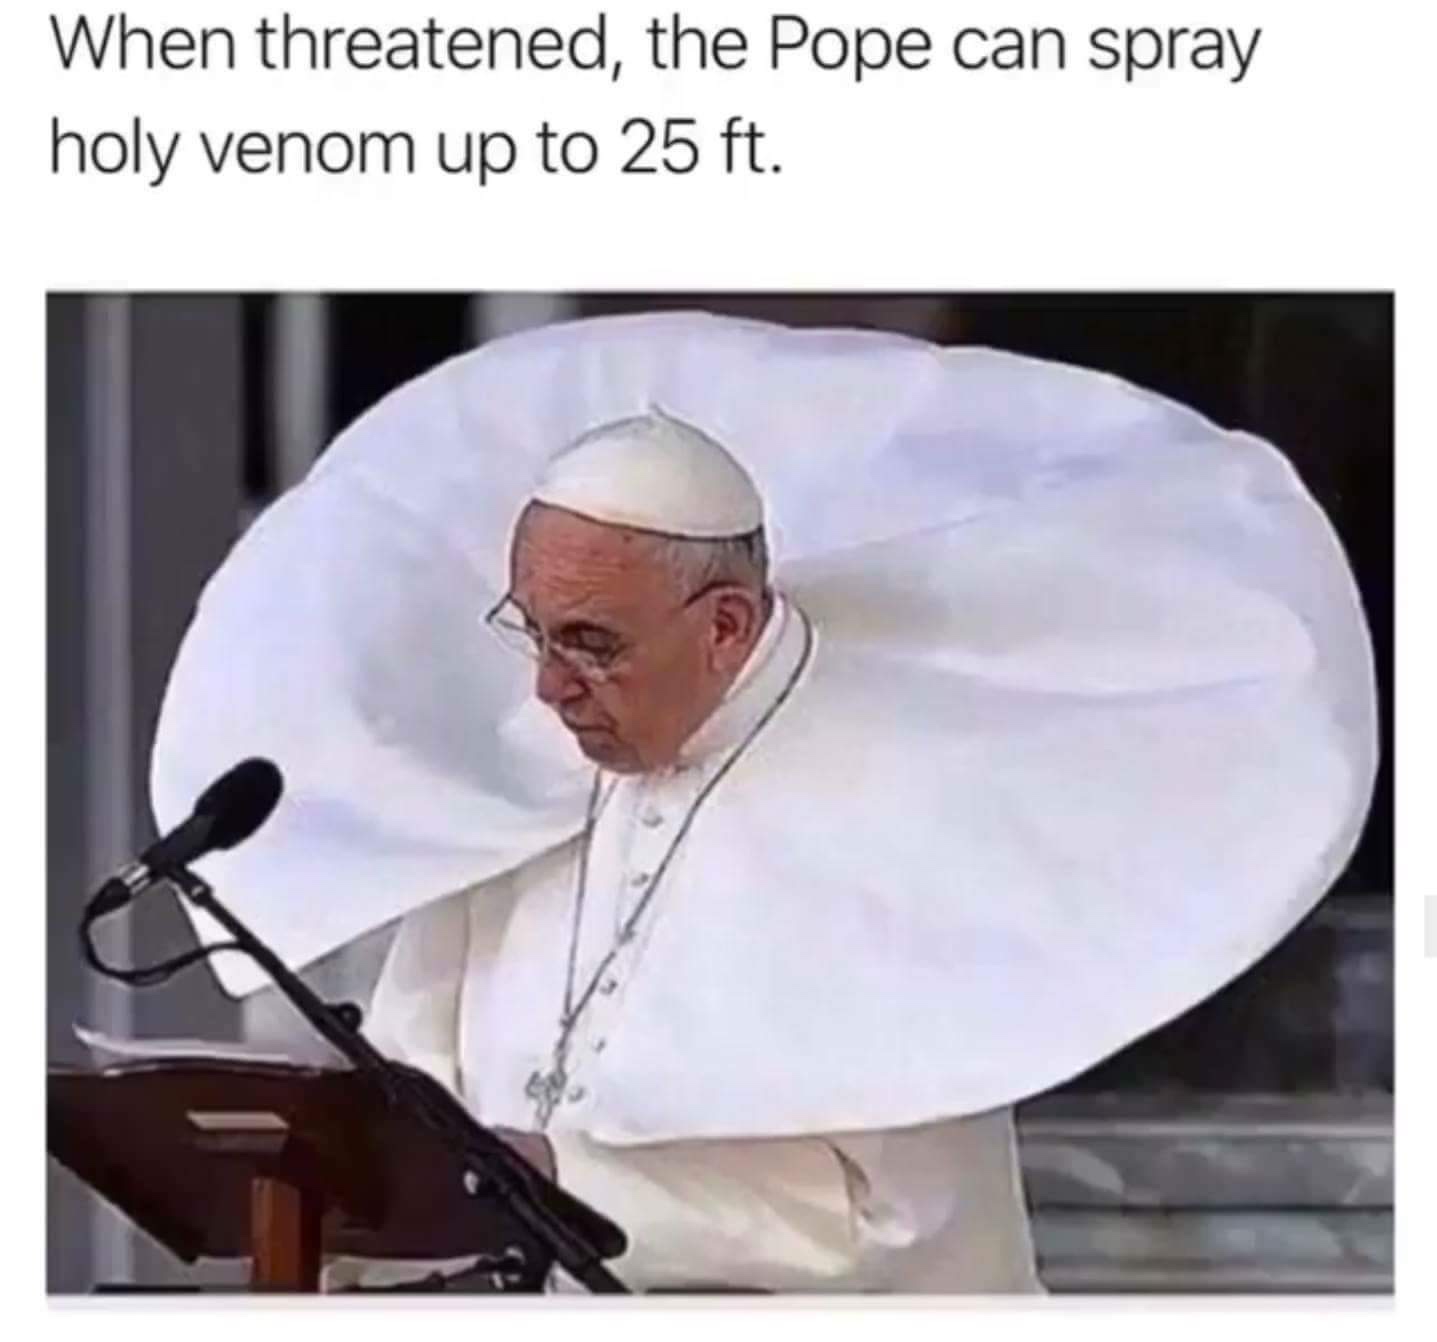 pope can spray holy venom - When threatened, the Pope can spray holy venom up to 25 ft.